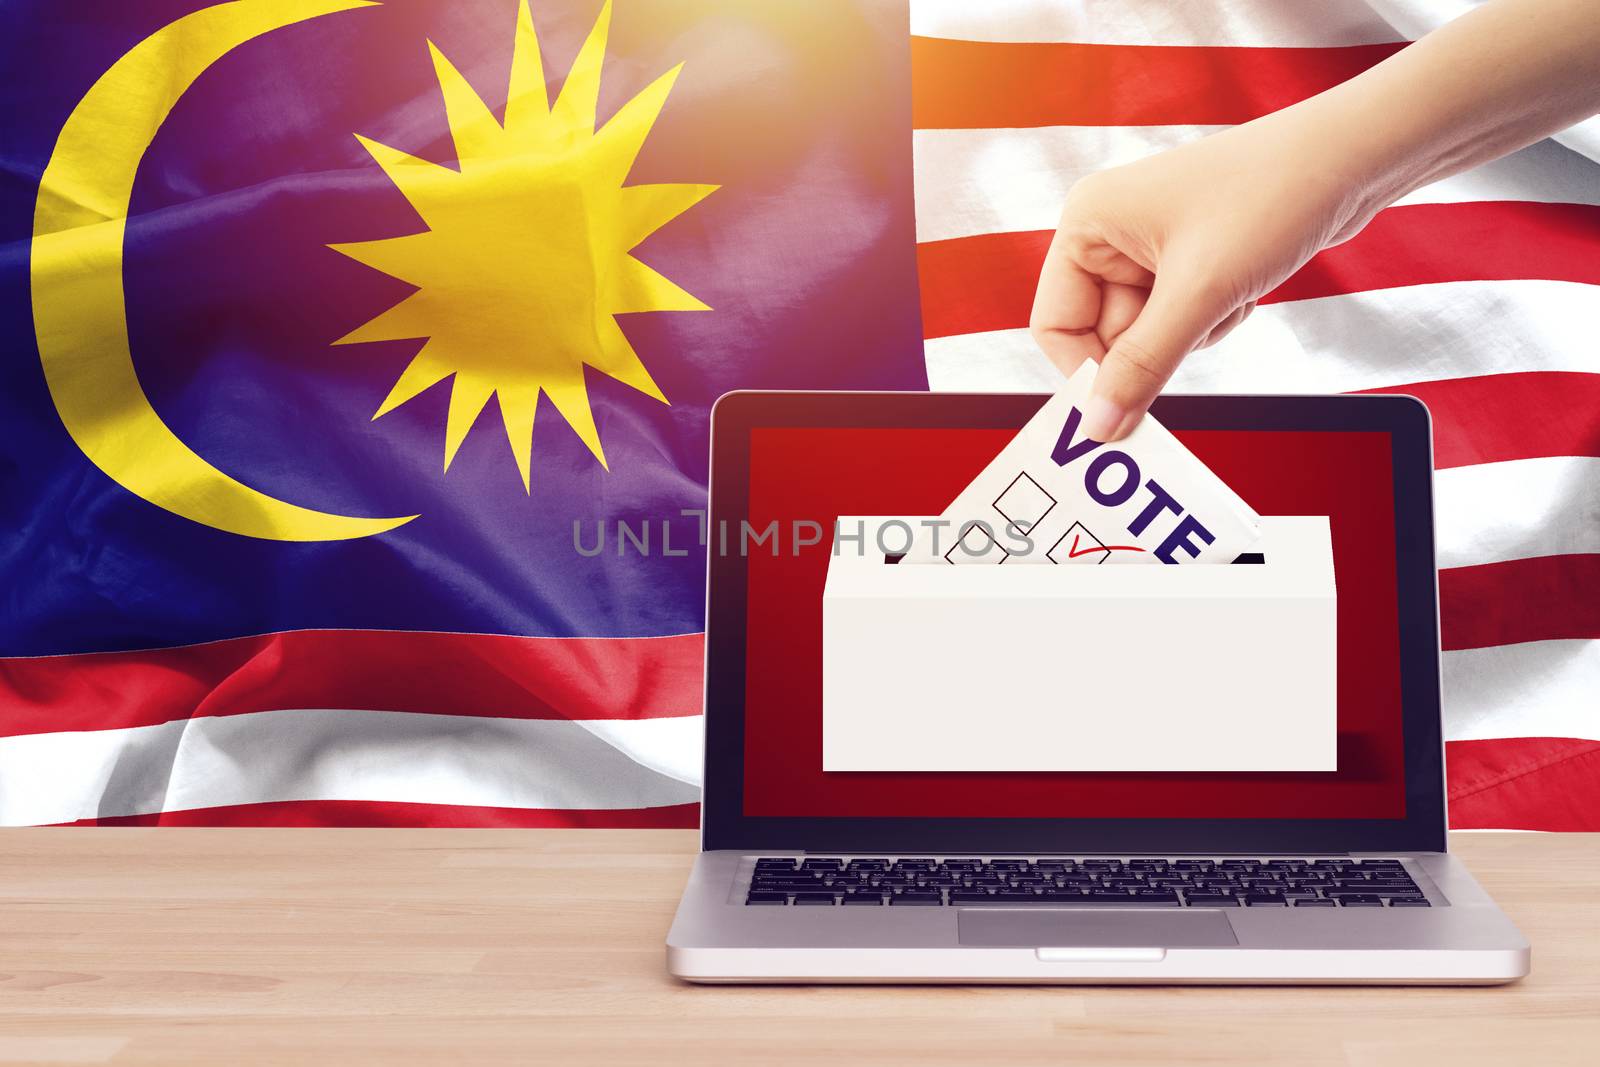 online vote , poll, exit poll for Malaysia general election concept. close up hand of a person casting a ballot at elections during voting on canvas Malaysia flag background. by asiandelight